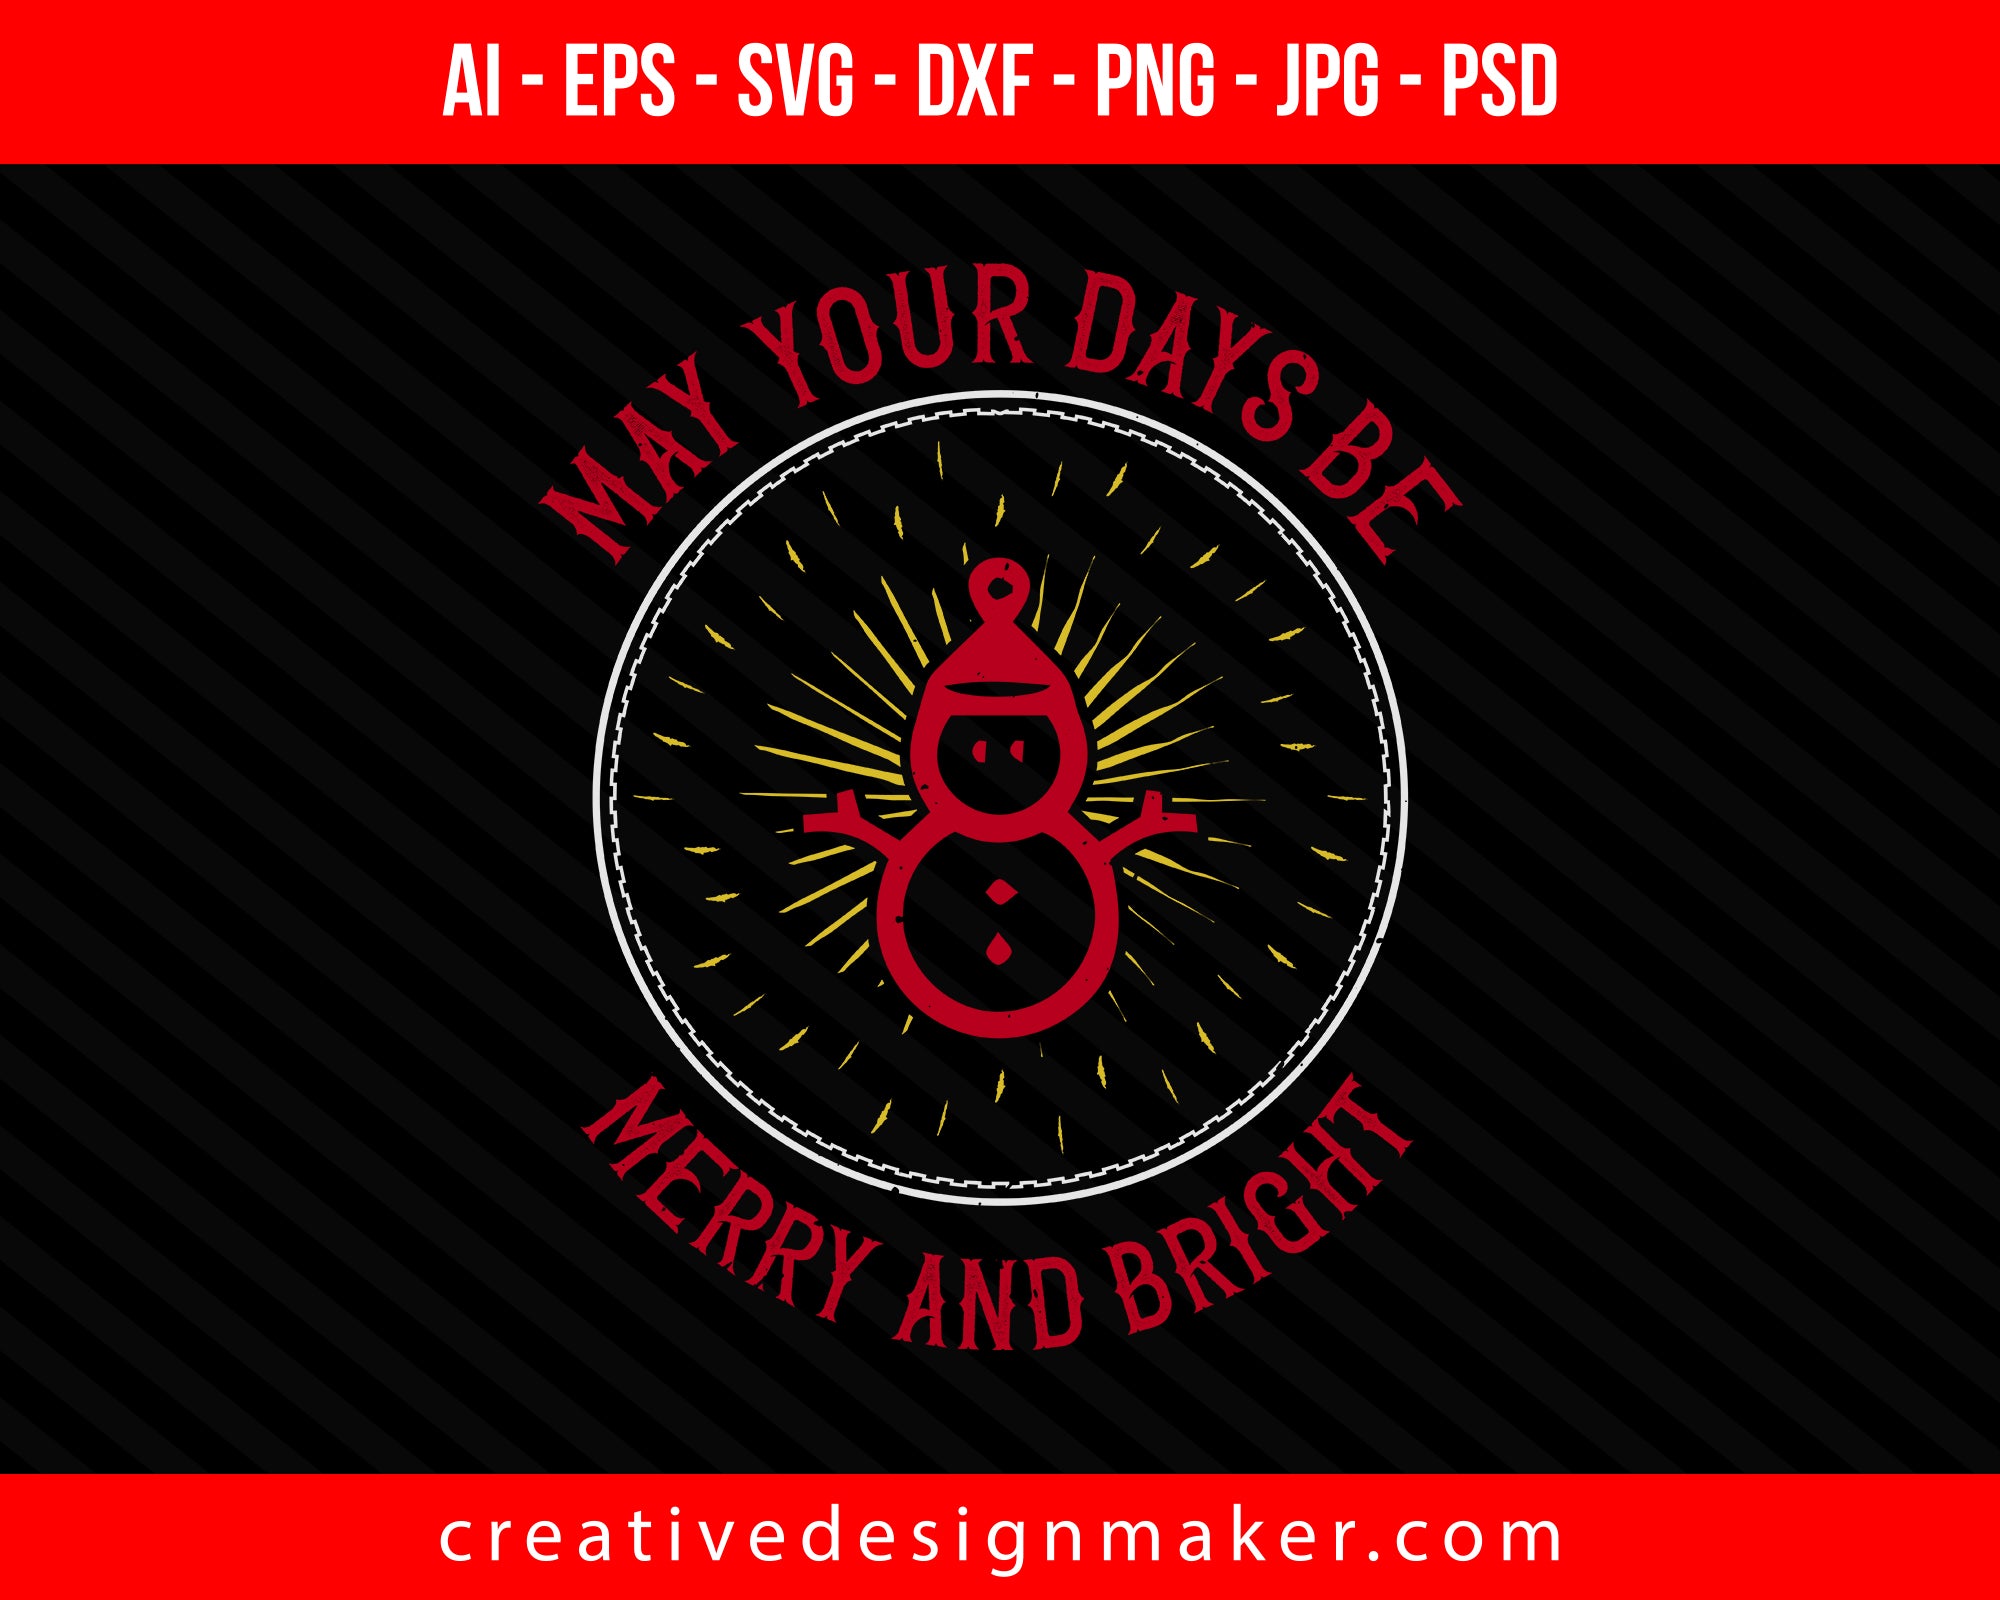 May your days be merry and bright Christmas Print Ready Editable T-Shirt SVG Design!